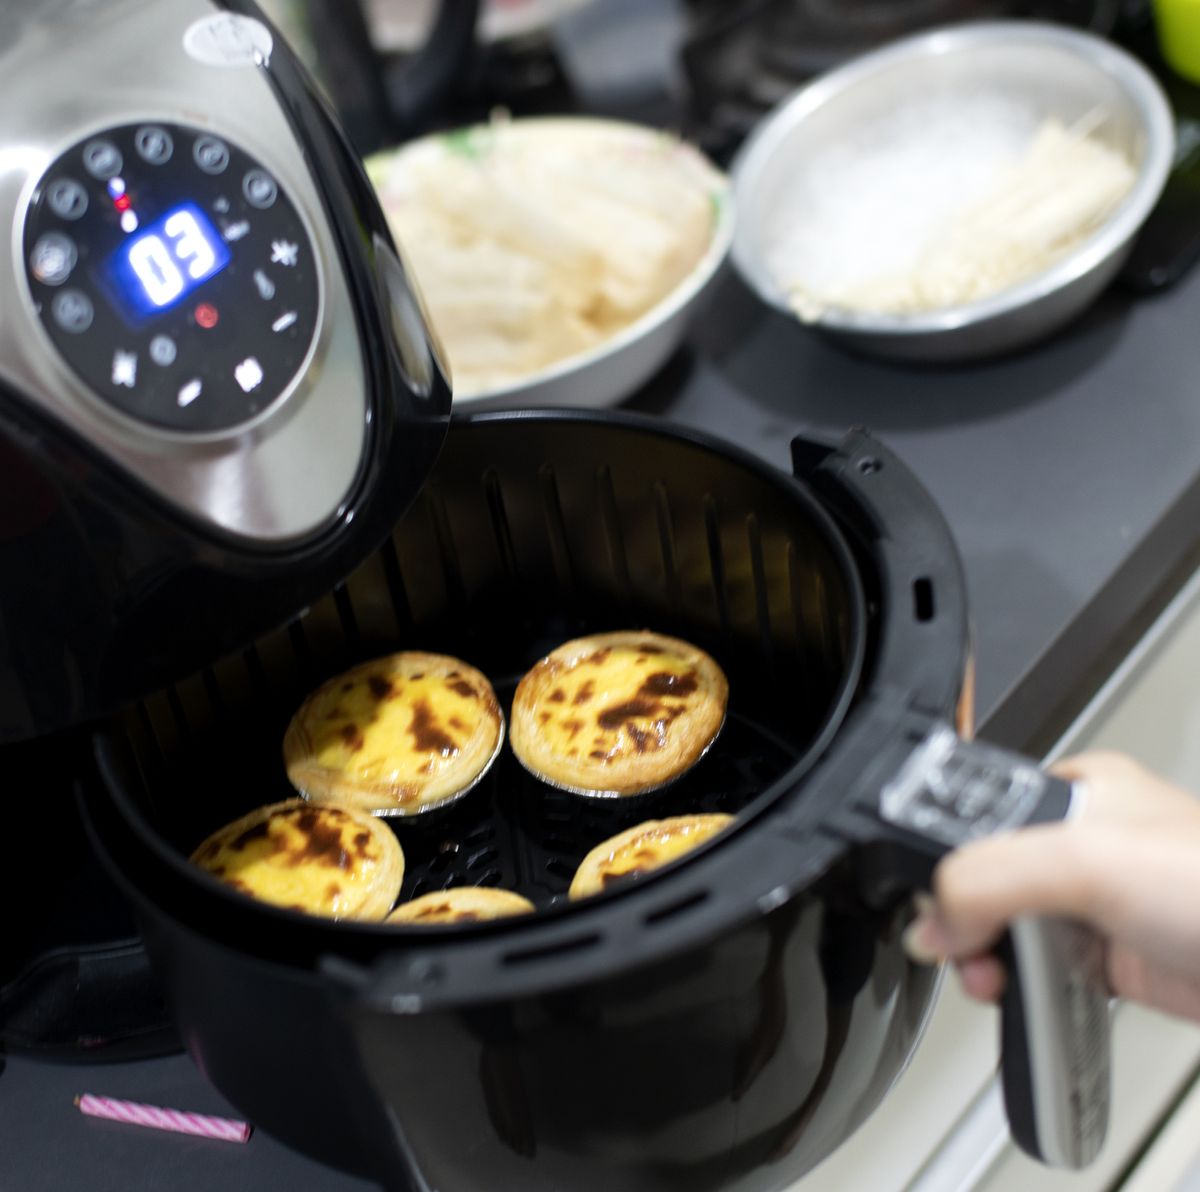 Review of BELLA 2.2LB Best Convention Air Fryer for Cooking Food